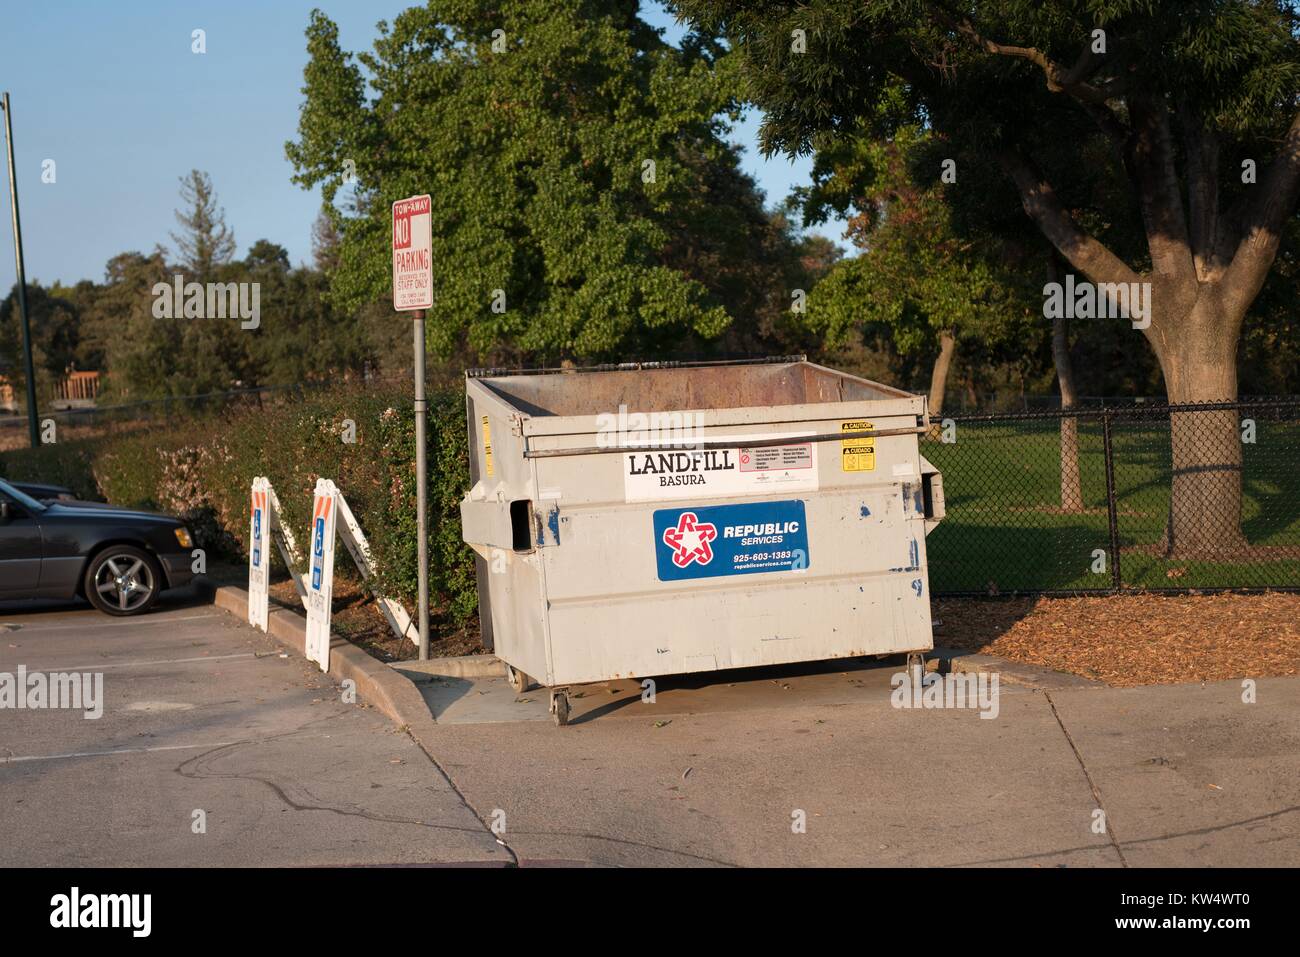 Republic Services garbage dumpster in a public park in Walnut Creek, California, September 19, 2016. Republic Services is the 2nd largest solid waste disposal company in the United States. Stock Photo